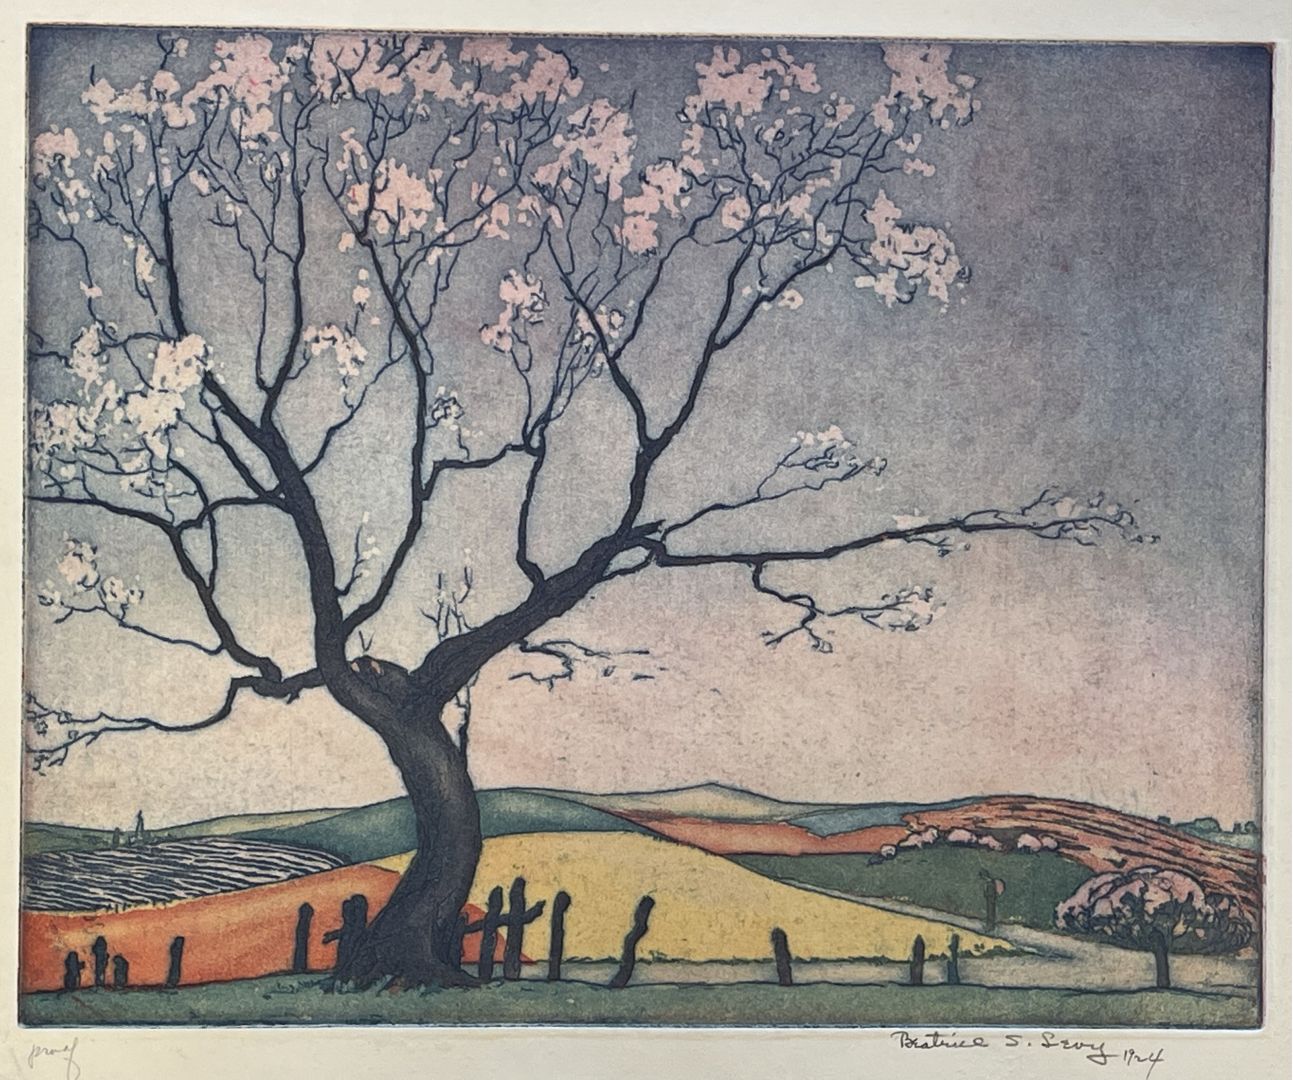 UNTITLED (LANDSCAPE WITH FLOWERING TREE)